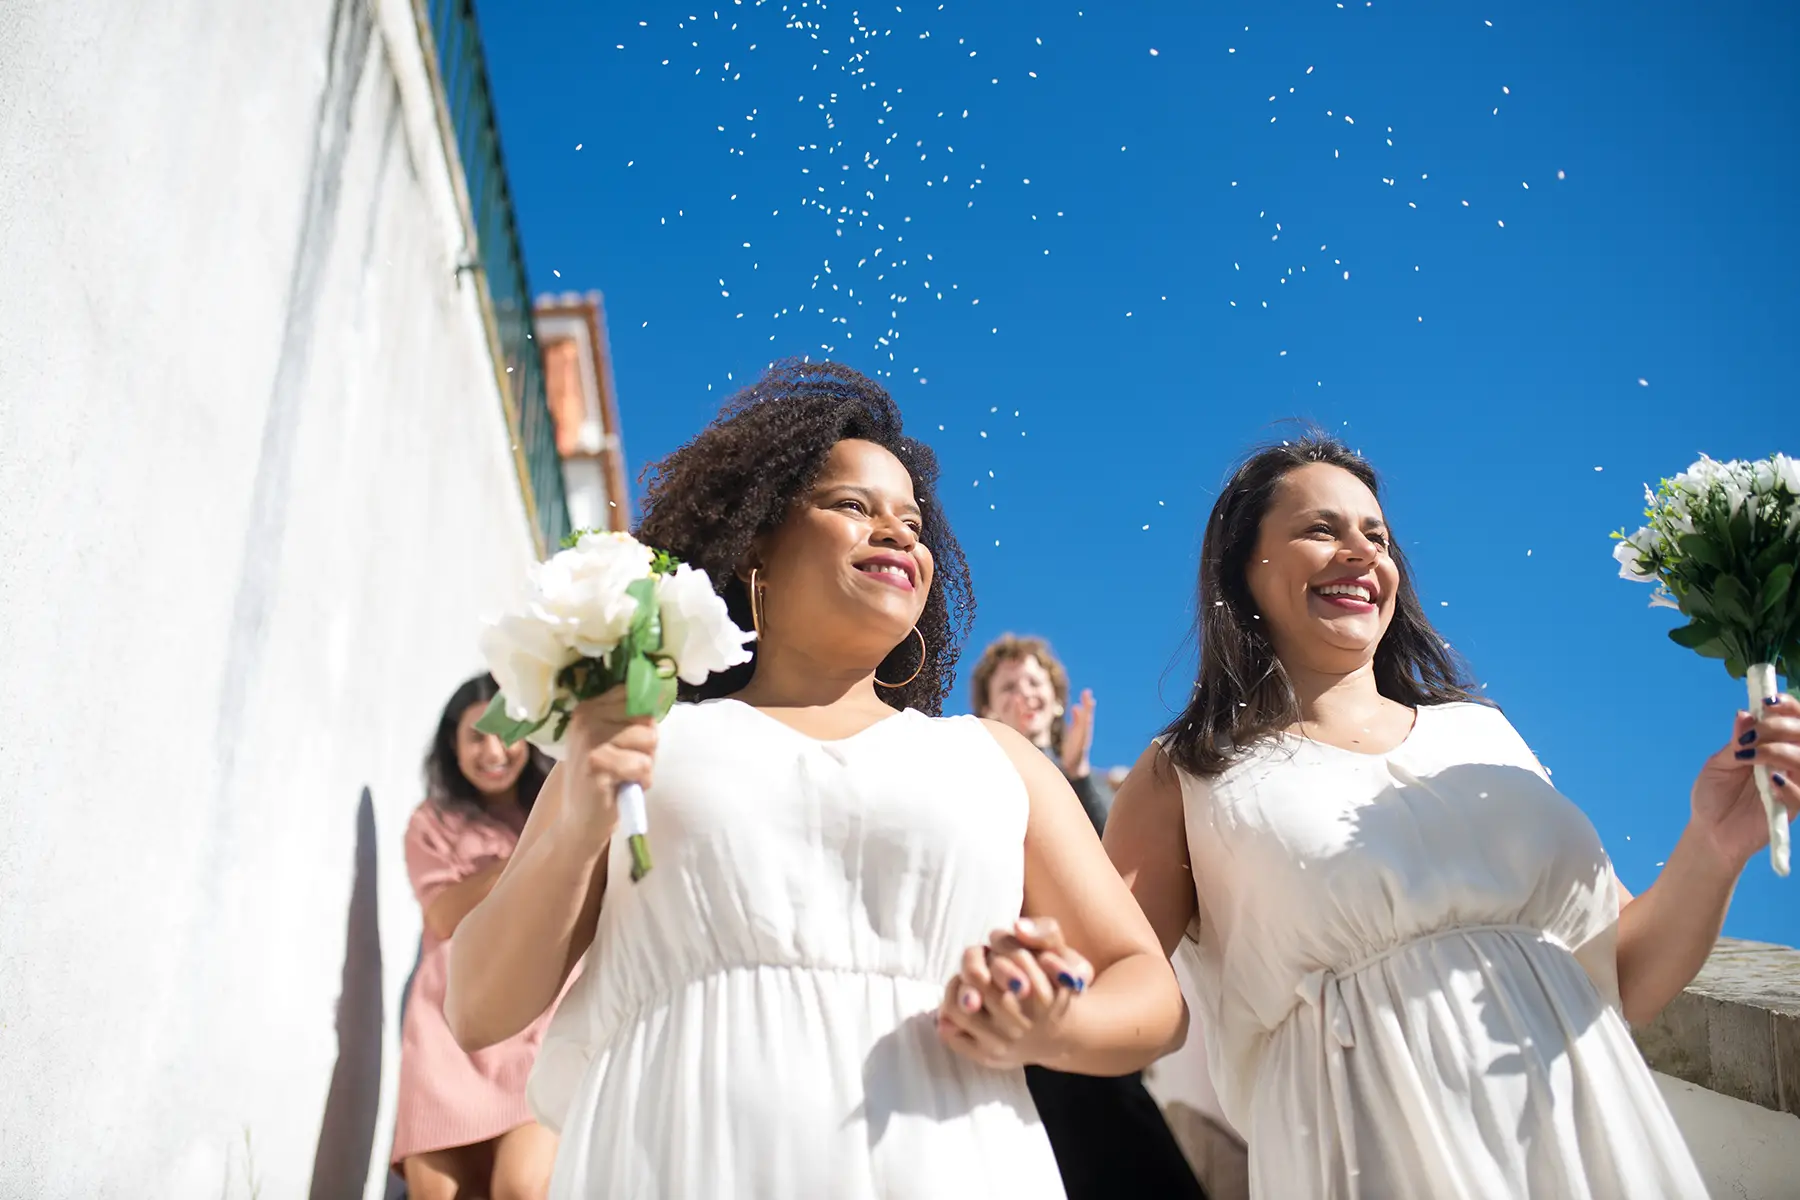 Wedding guests throwing rice over two brides in Portugal